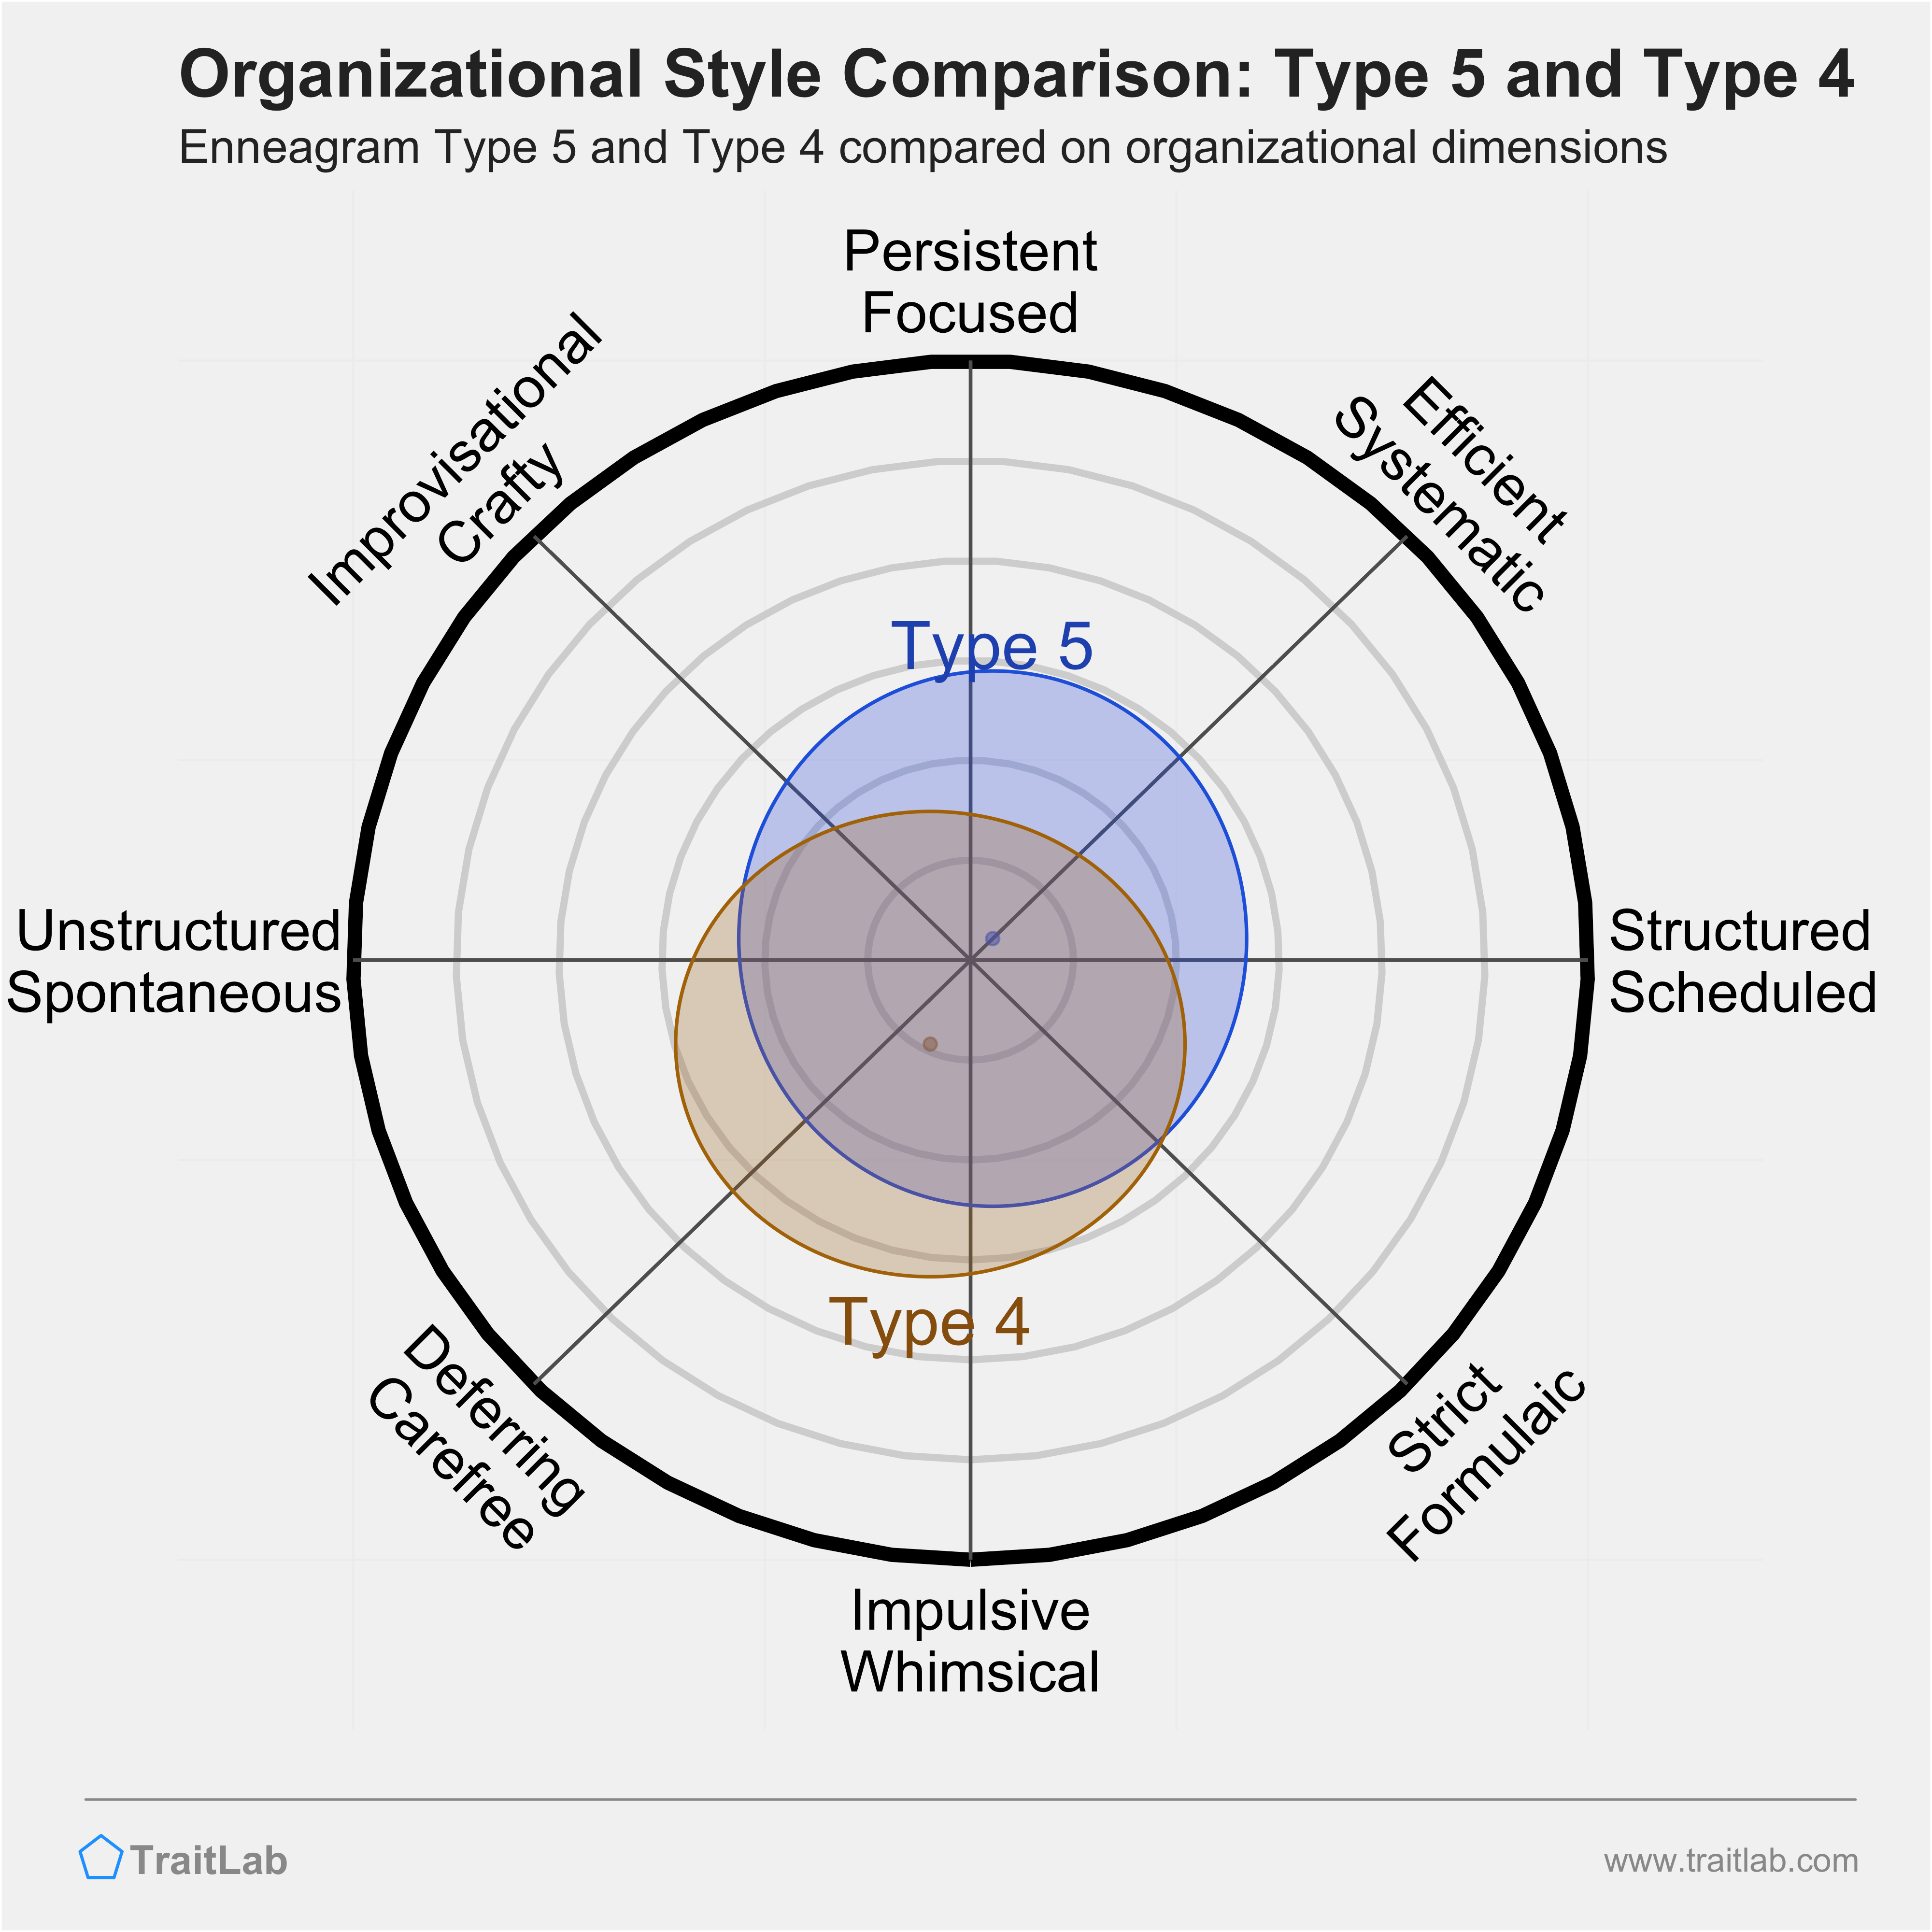 Type 5 and Type 4 comparison across organizational dimensions